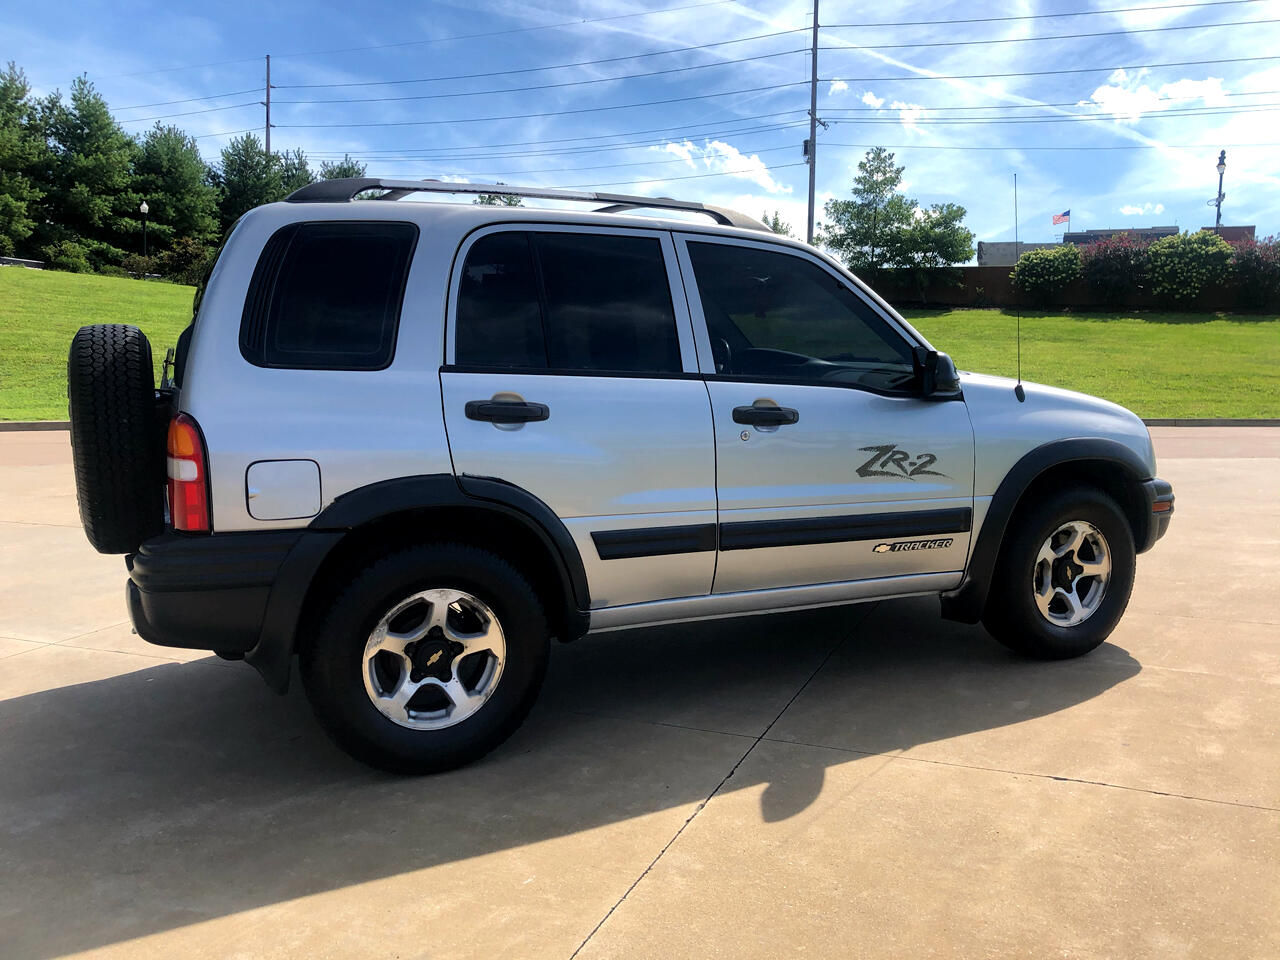 Used 2002 Chevrolet Tracker 4dr Hardtop 4WD ZR2 for Sale ...